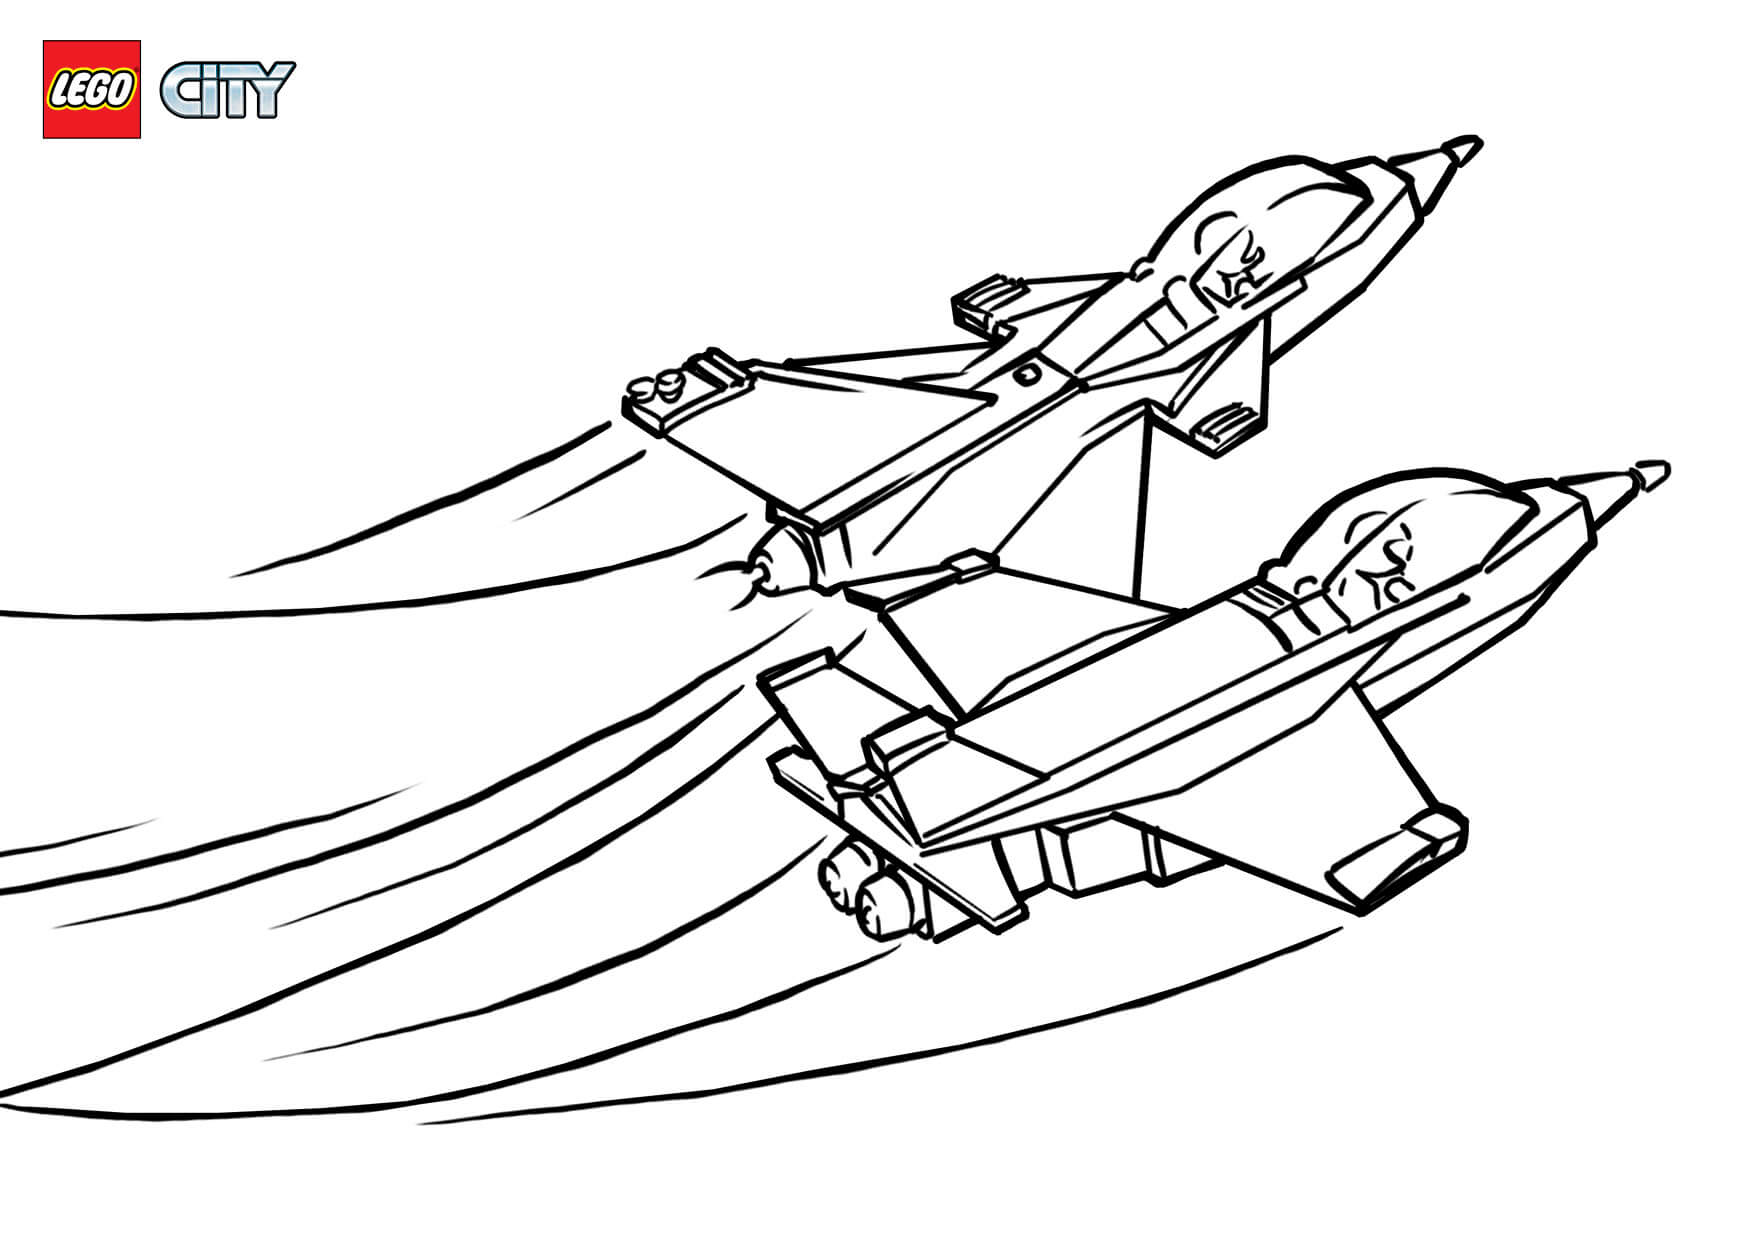 Lego City Jet Airport Coloring Pages   Coloring Cool